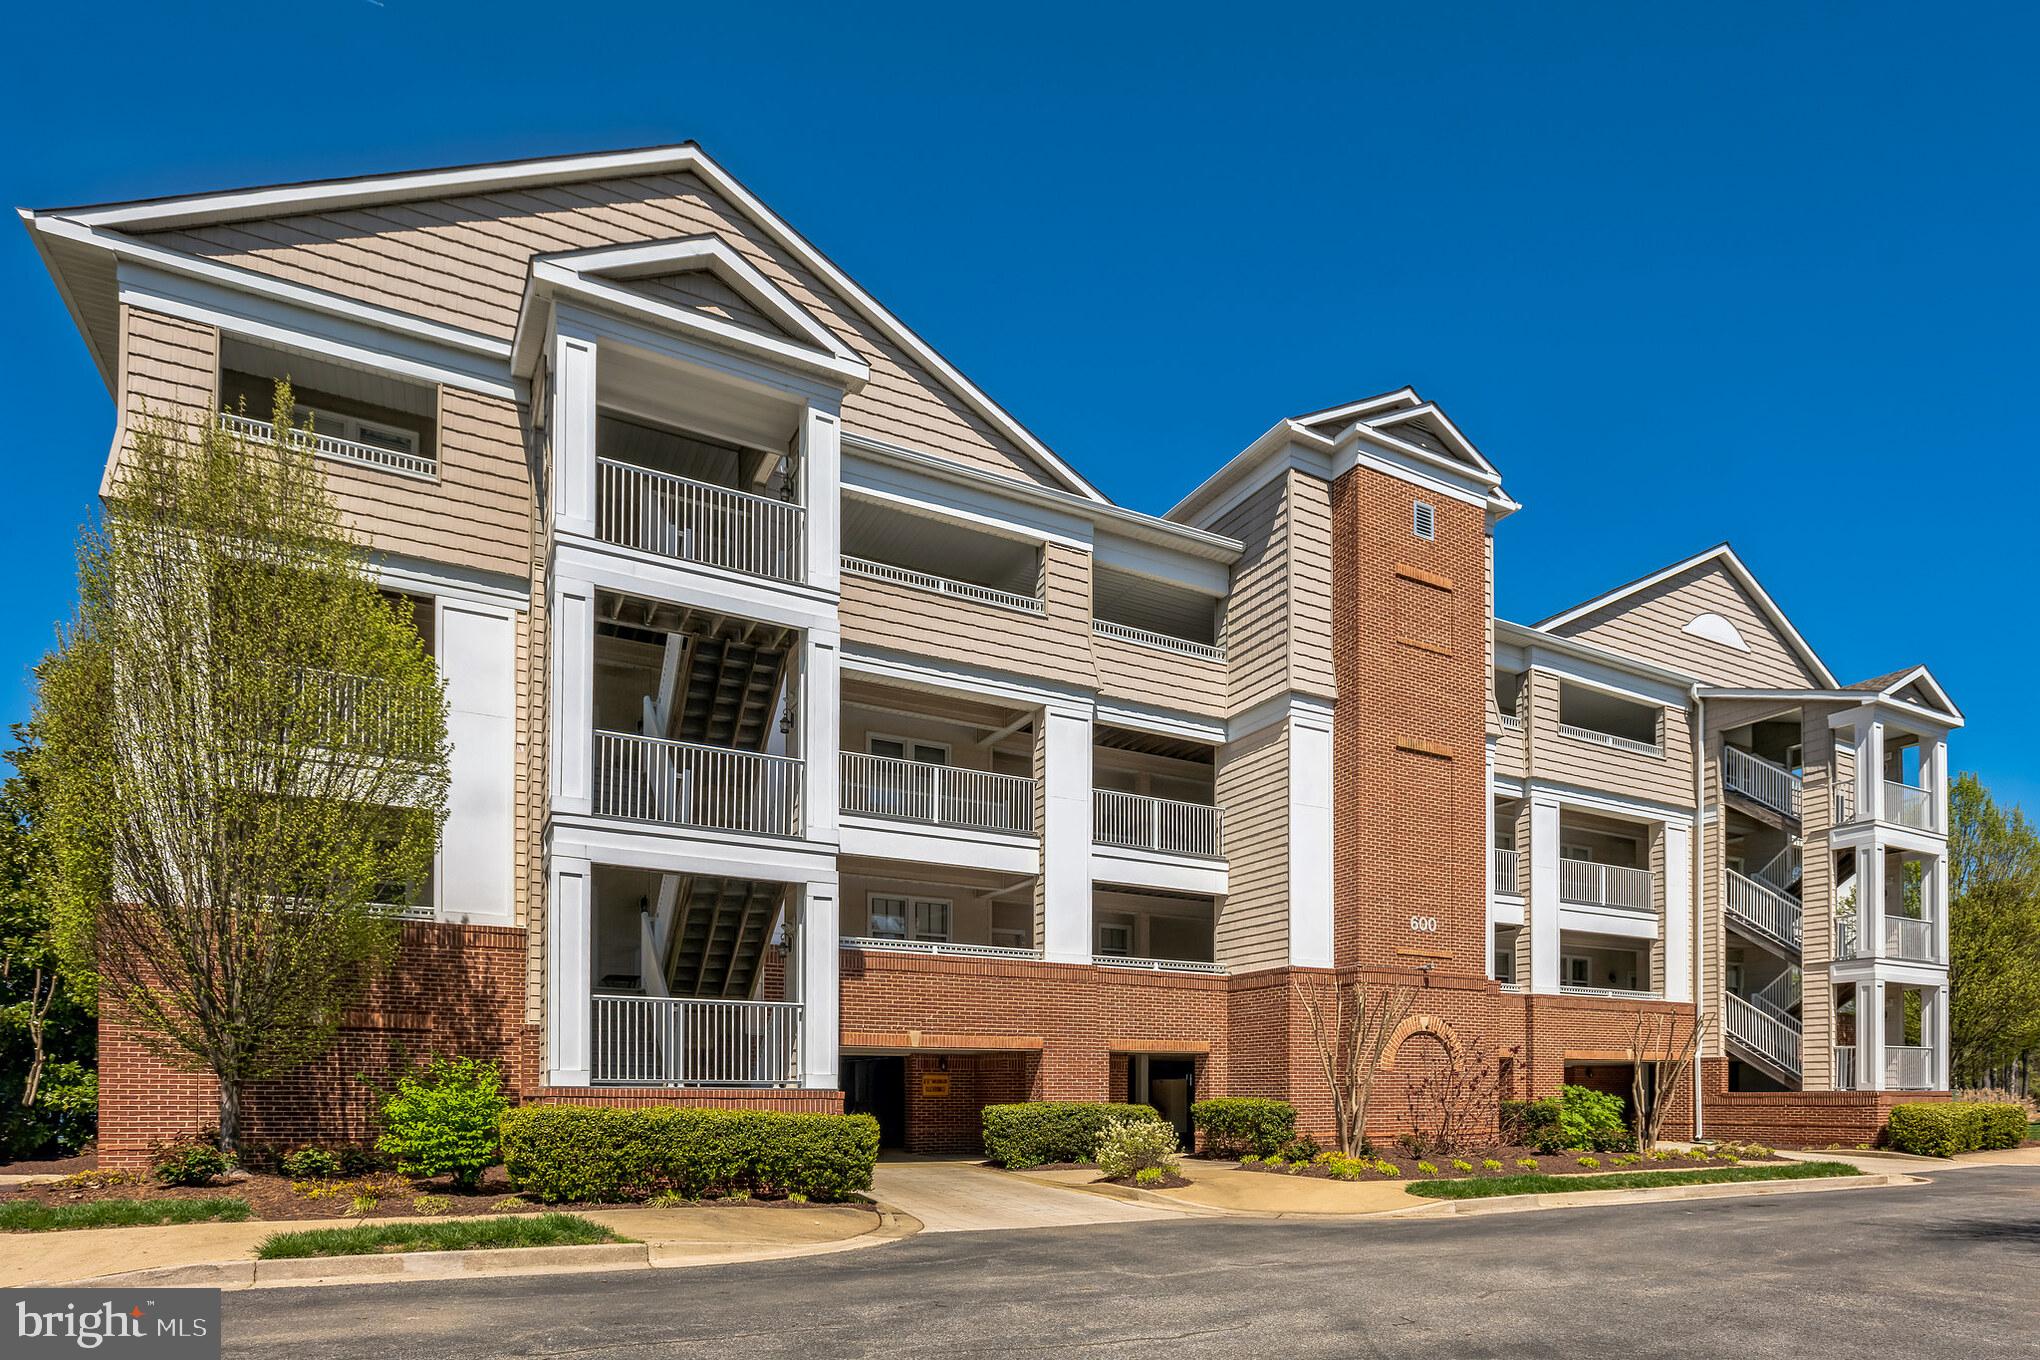 Beautiful  Oyster Bay corner unit condo. (Weatherly floor plan) with breathtaking 180° views of Back Creek. This contemporary condo was completely renovated in 2018. New paint, flooring, carpet, appliances including washer and dryer. This unit has a cozy balcony where you can enjoy peaceful  sunsets in the evening  that are like icing on the cake! Views through the home overlooking the water are gorgous. The balcony has an extra storage closet ( unique to this building).  Open floor plan features a remarkable primary bedroom and bath, 1 additional bedroom/office . Beautiful kitchen with granite countertops. This condo also has a deeded boat slip 6 H. Oyster Bay waterfront  community has so much to offer from boating, tennis/pickleball courts, Kayaking, gym, clubhouse and an inground pool.  There is covered under ground parking, and  overflow parking  also available. Private storage area and access via elevator or stairs. The gardens are professionally landscaped.  Owner would need a rent back. They are building a home. This is the Weatherly floor plan.